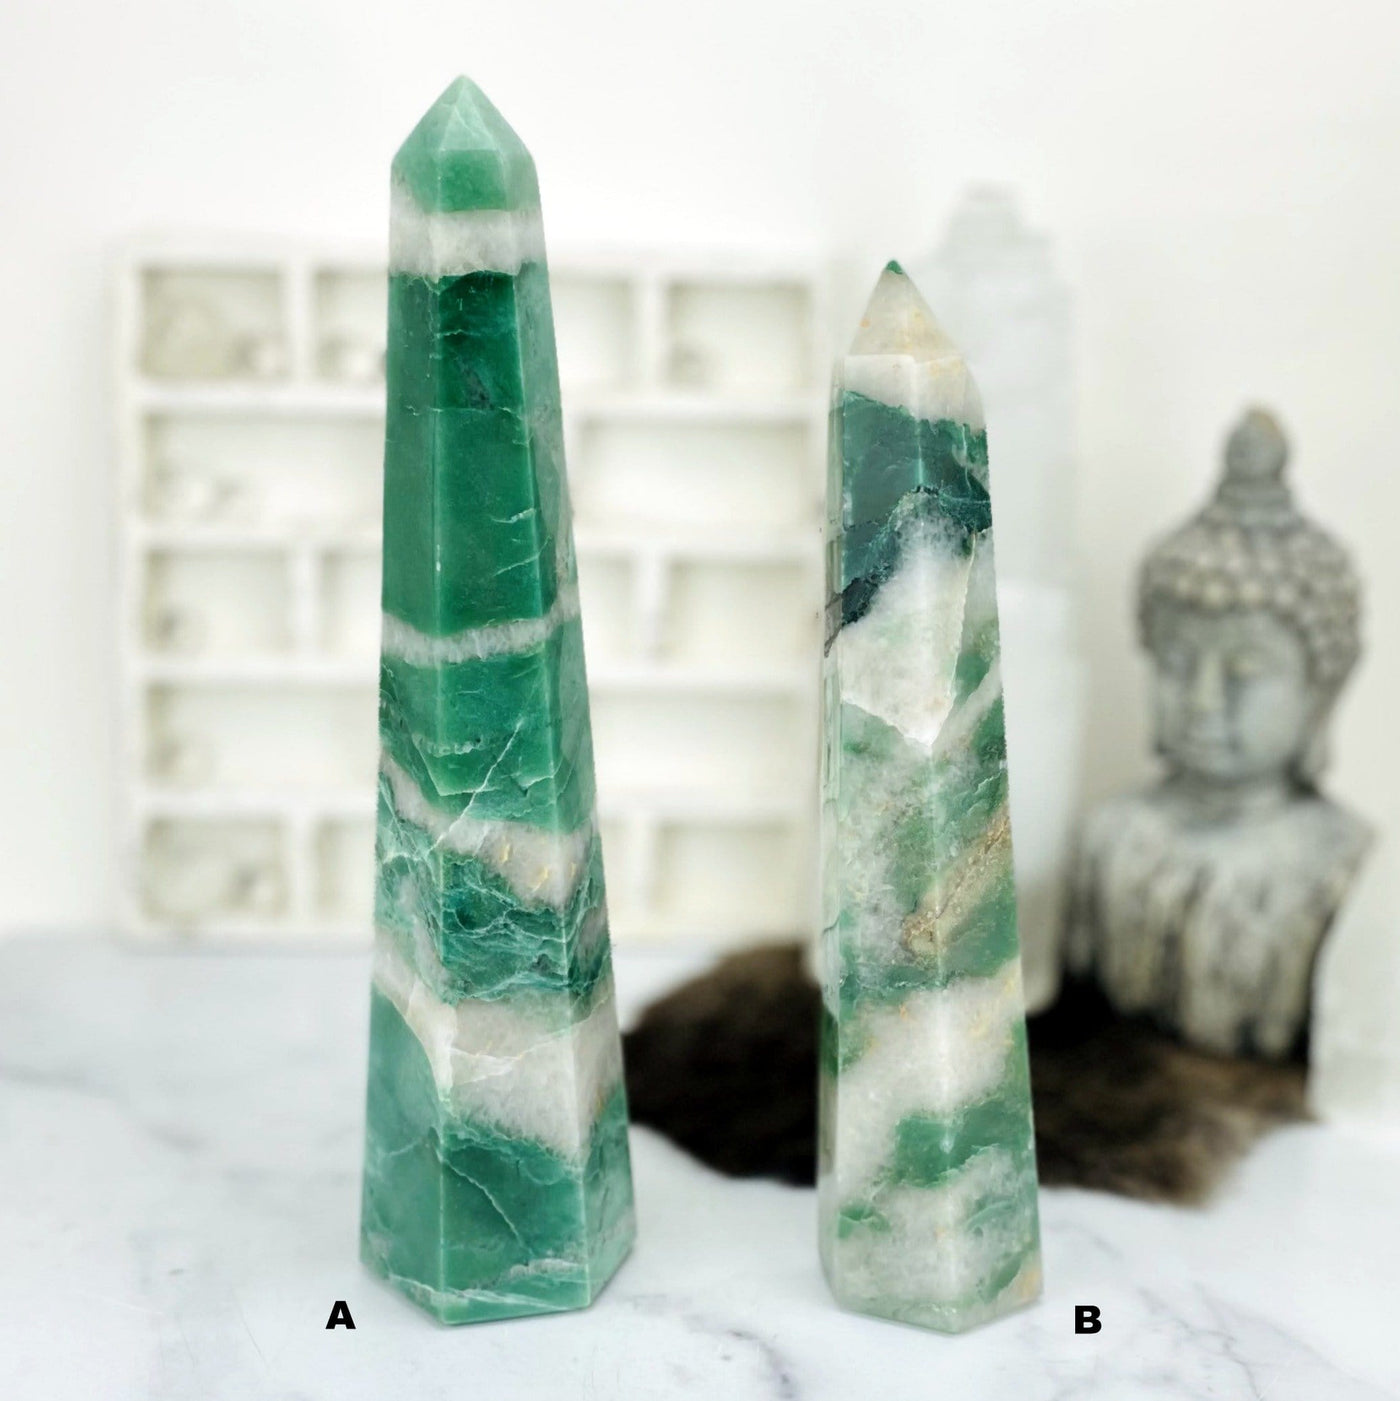 2 Green and White Quartz Polished Points with decorations blurred in the background